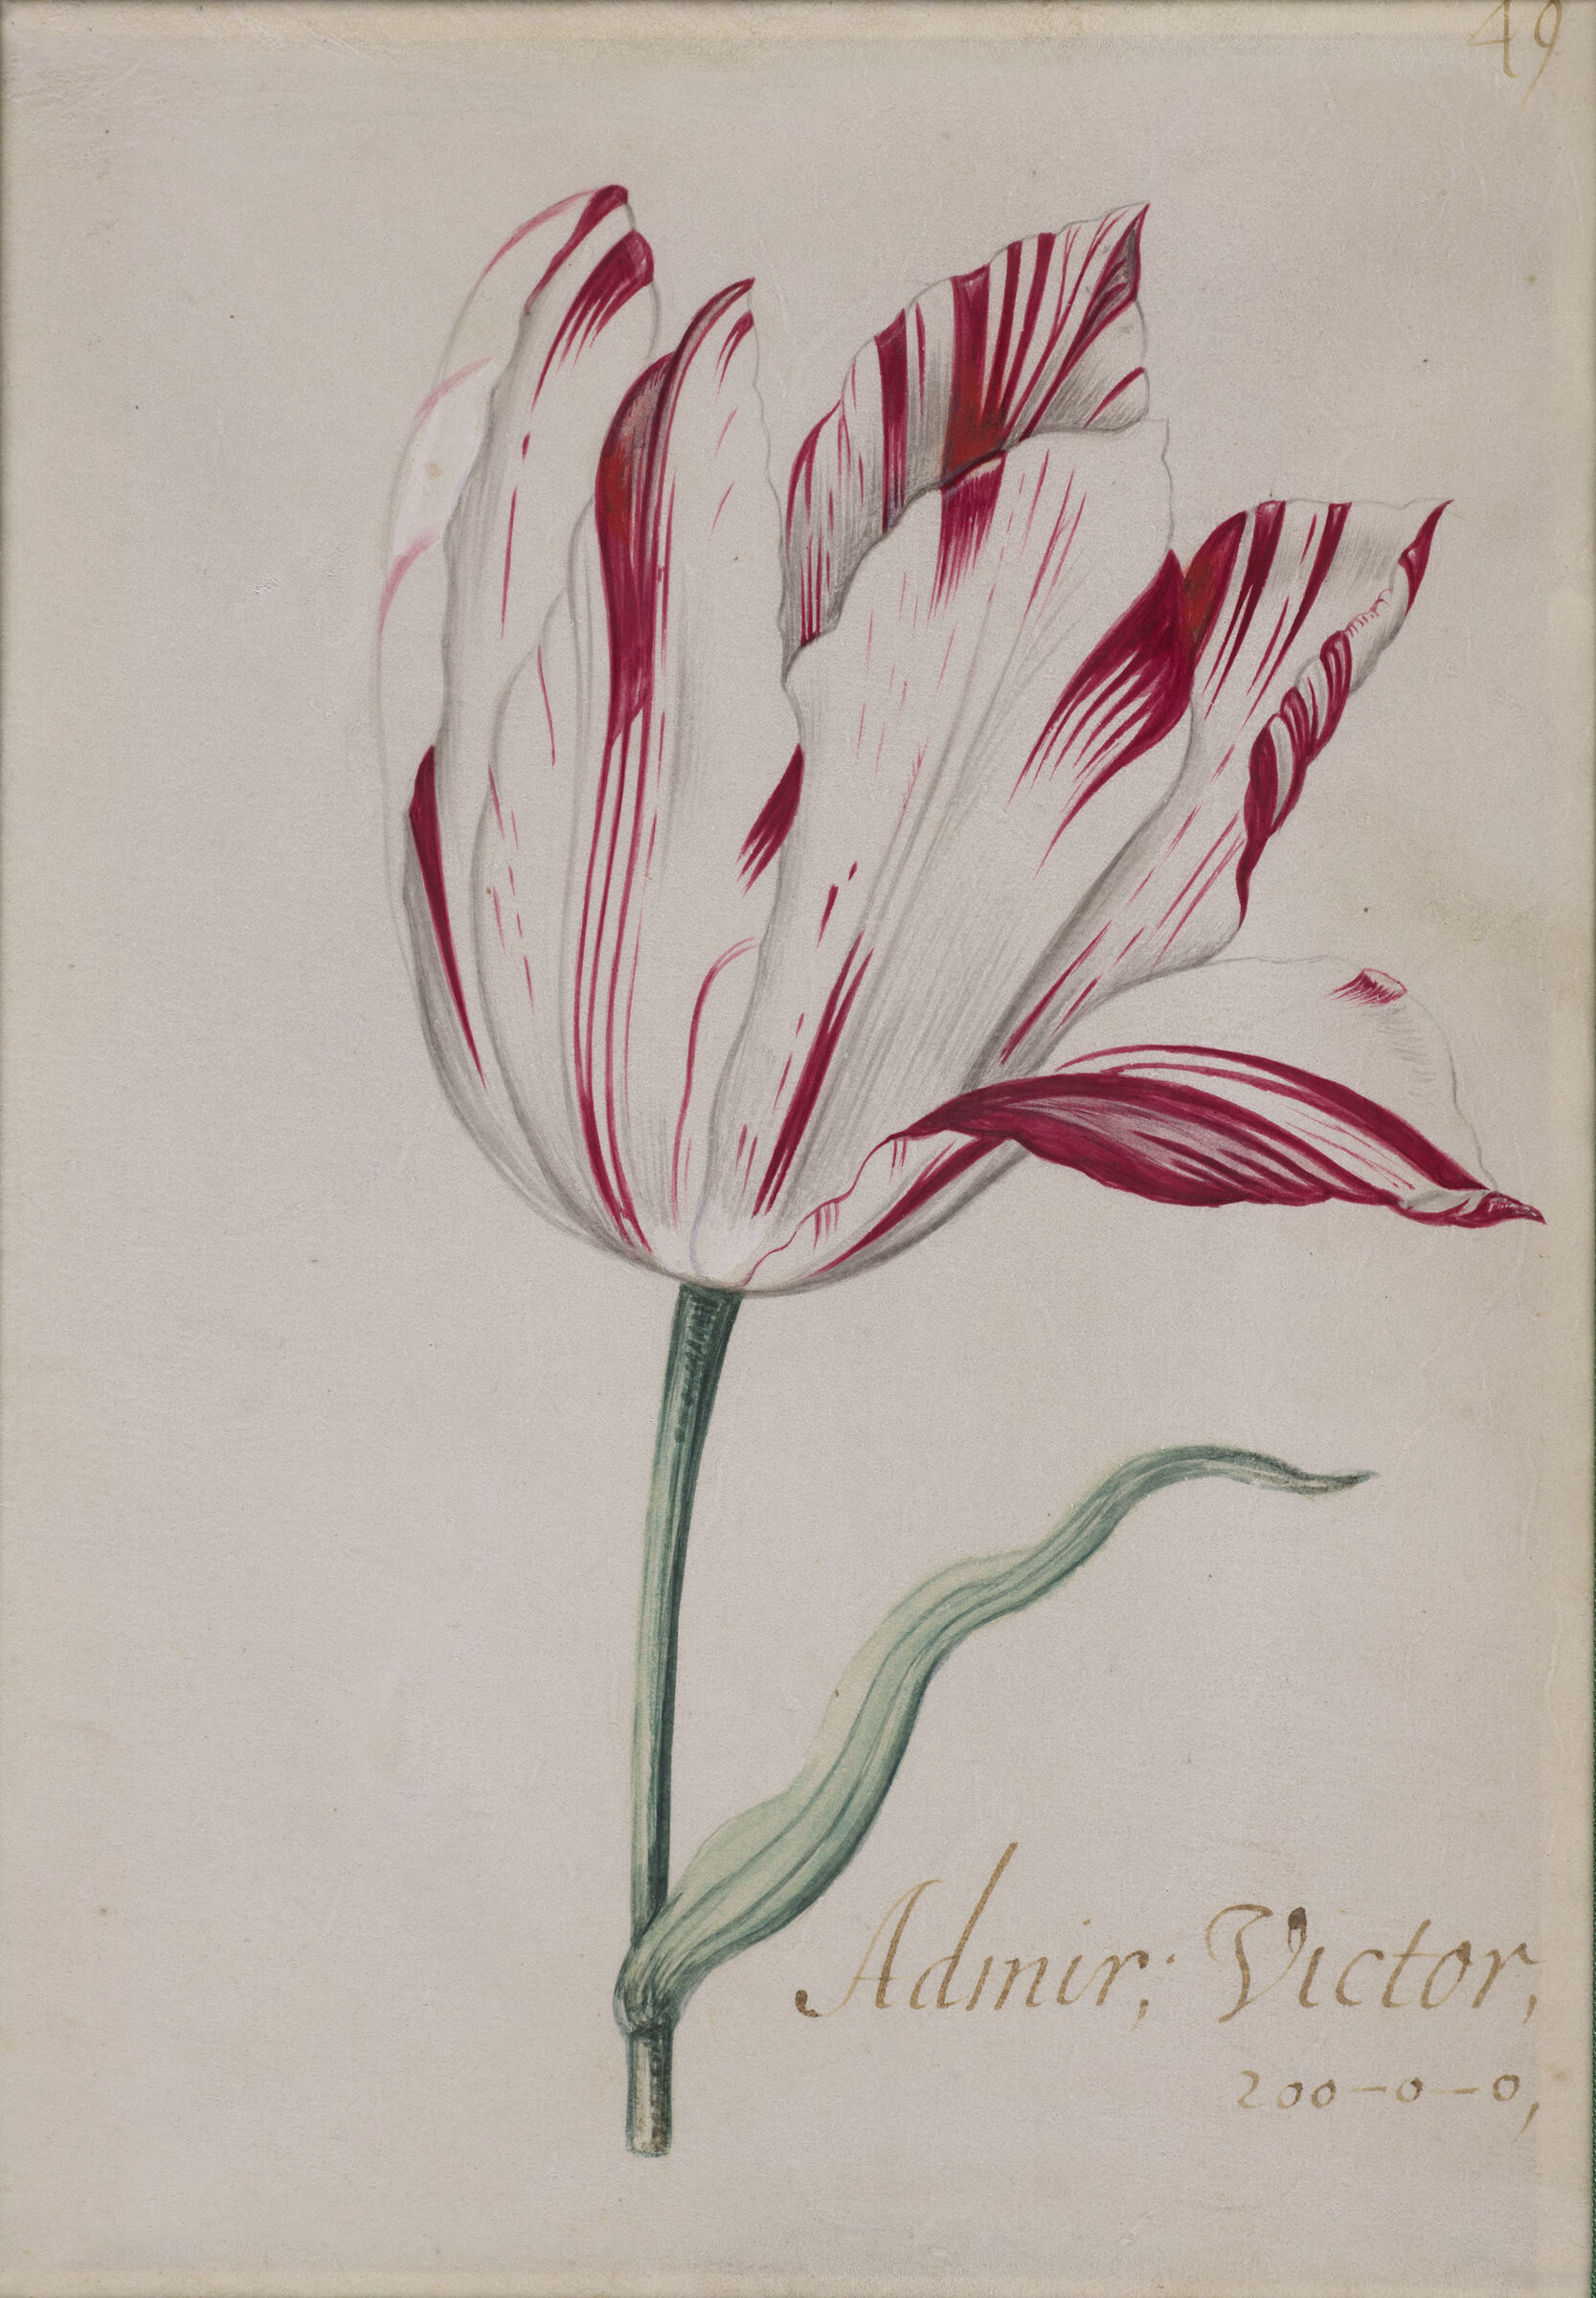 A Red And White Striped Tulip (Admiral Victor)